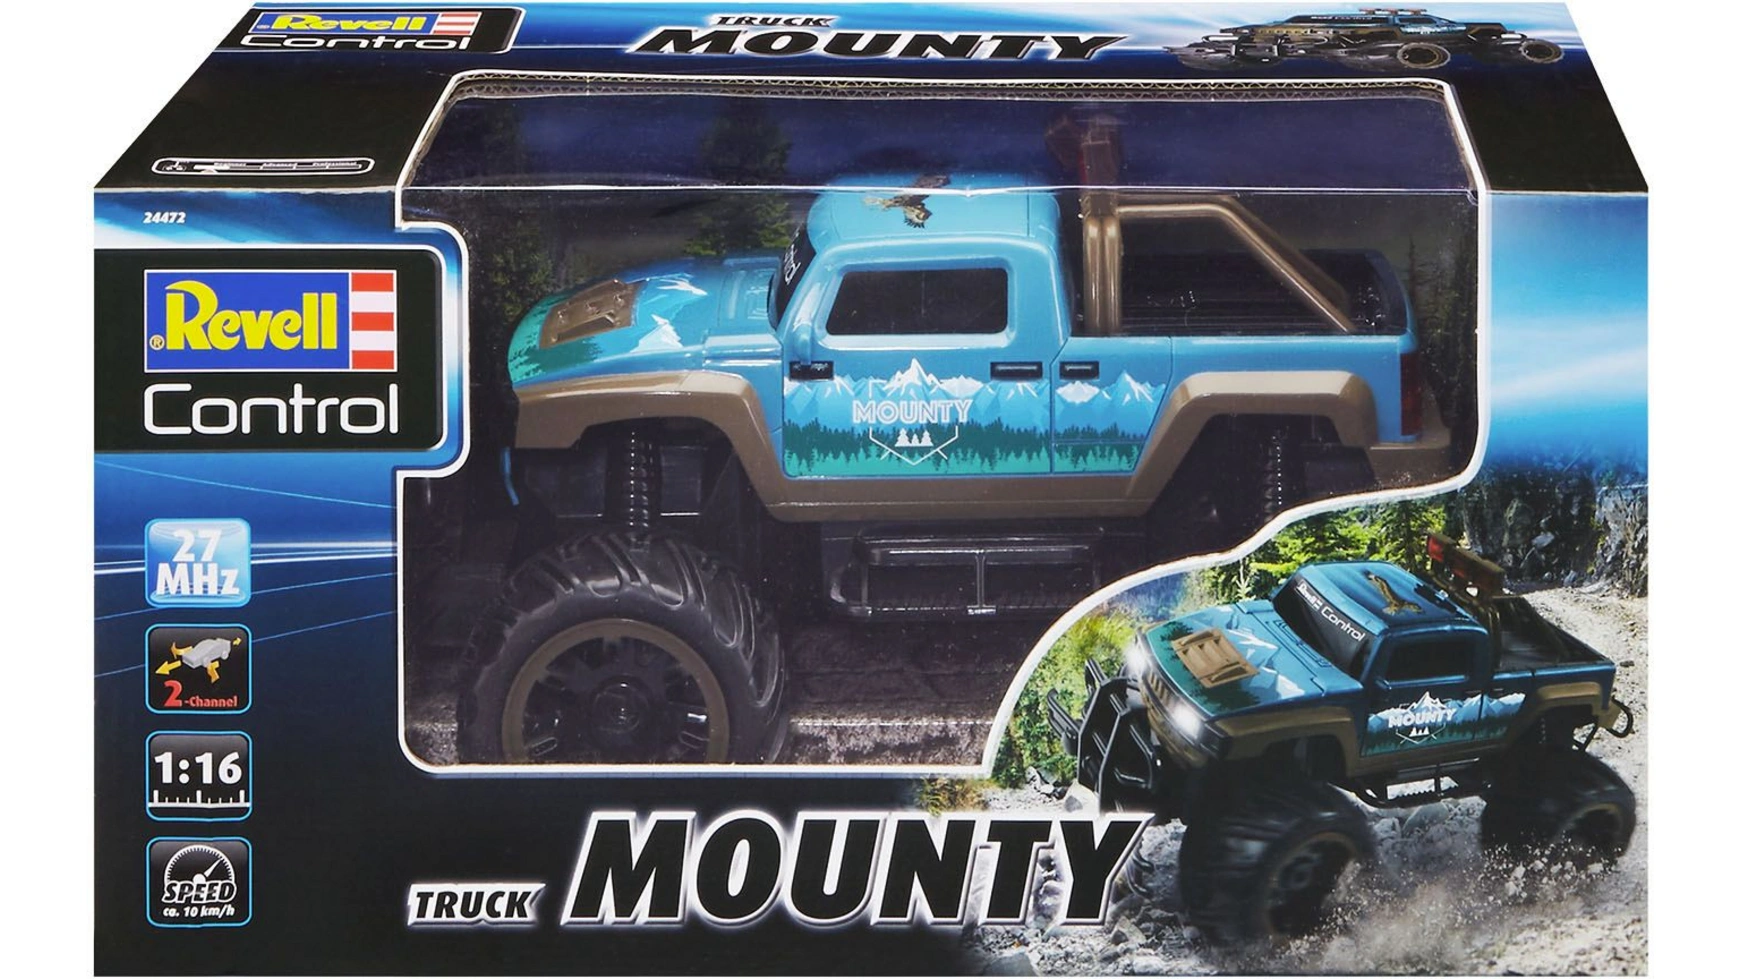 Revell Control RC Truck MOUNTY dj wpl half truck and truck modified rc car upgrade accessories wading throat high air inlet carro de control remoto